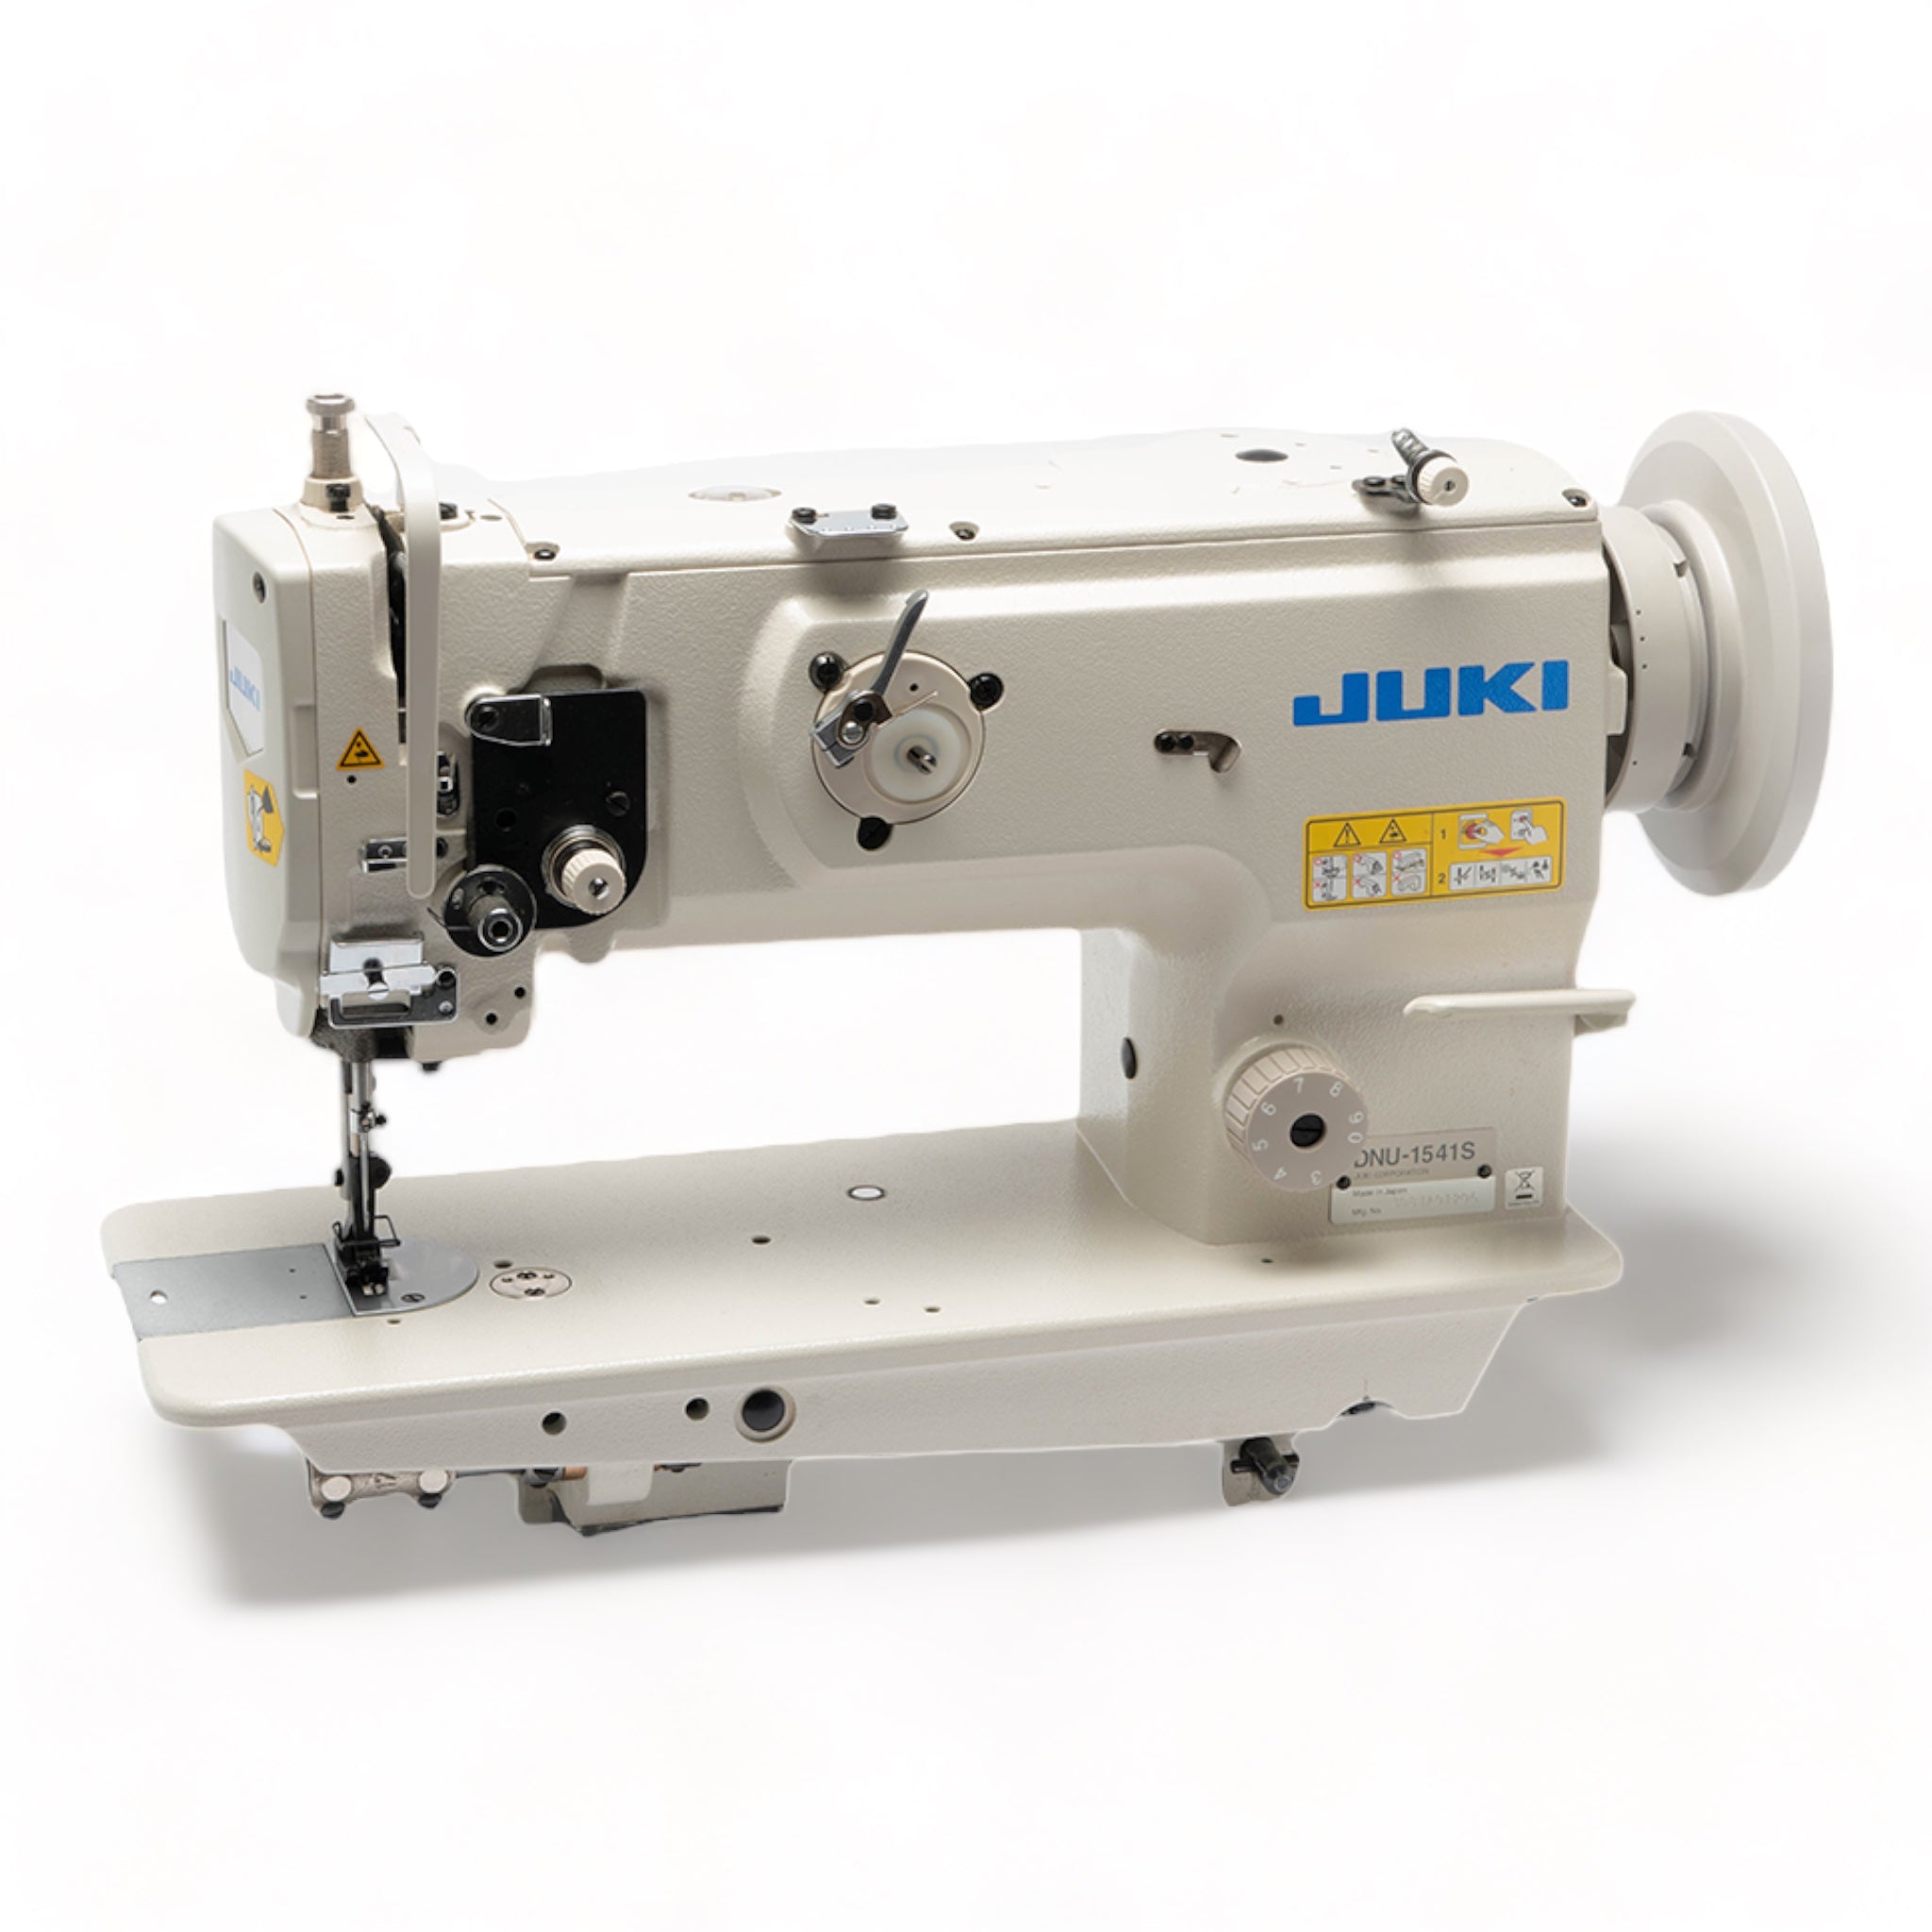 JUKI DNU-1541S Single Needle Heavy Duty Unison Feed Walking Foot Sewing Machine Assembled with Servo Motor, Table and Stand Included